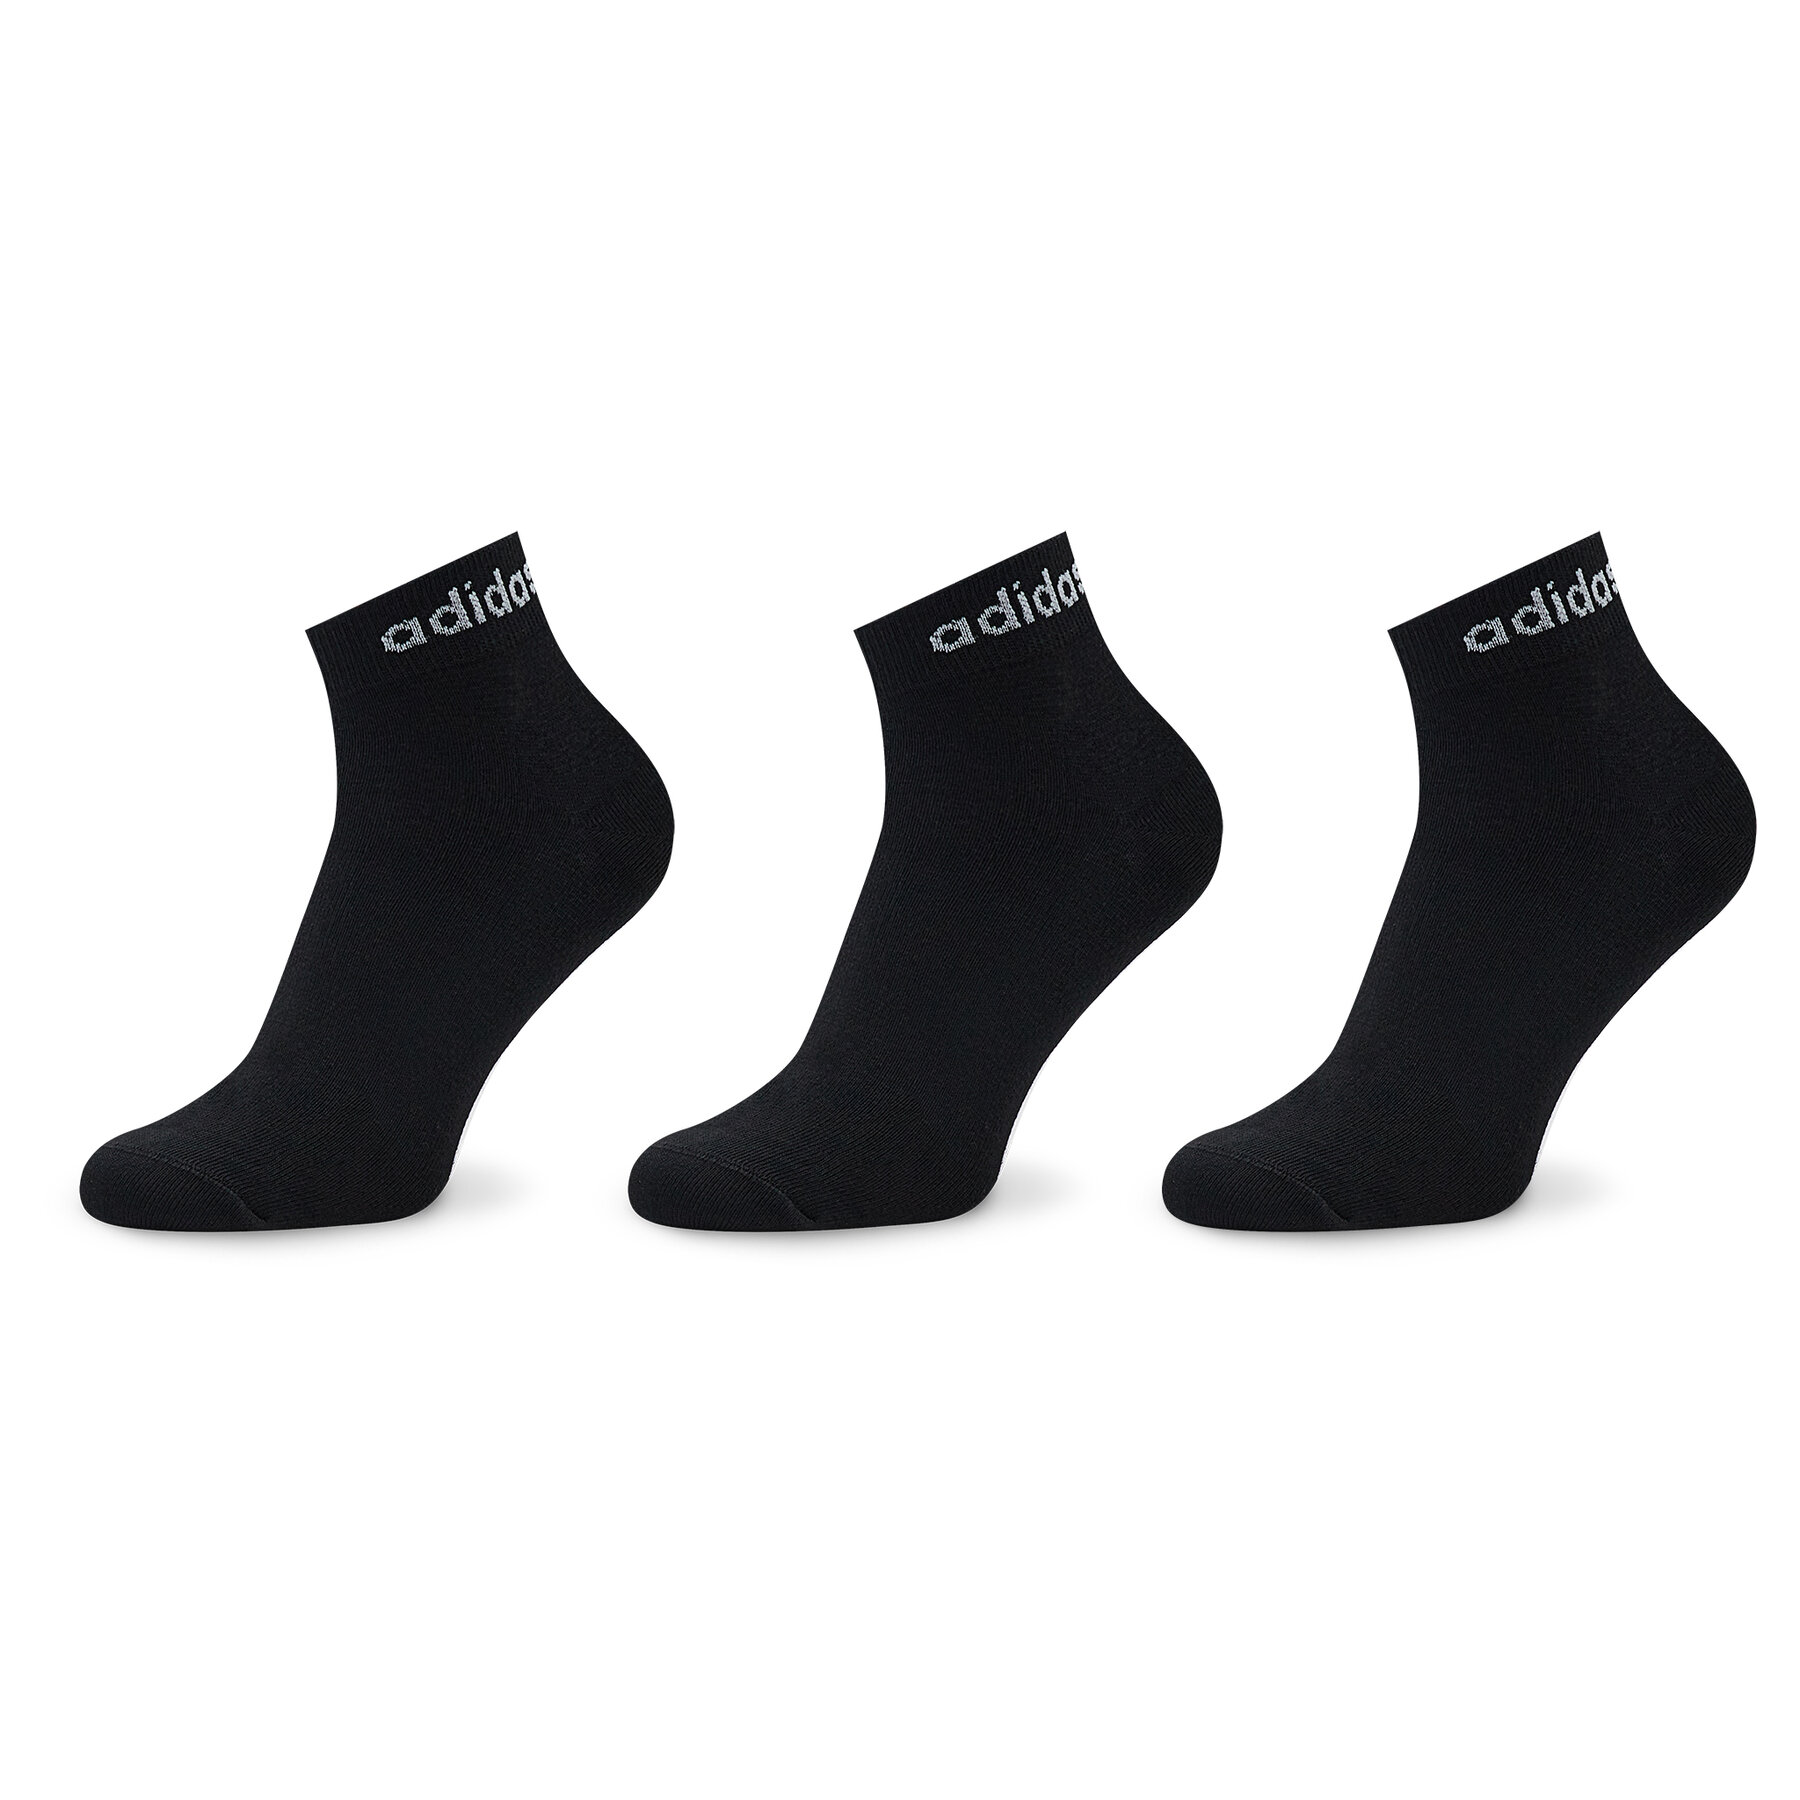 Chaussettes basses unisex adidas Think Linear Ankle Socks 3 Pairs IC1305 Noir